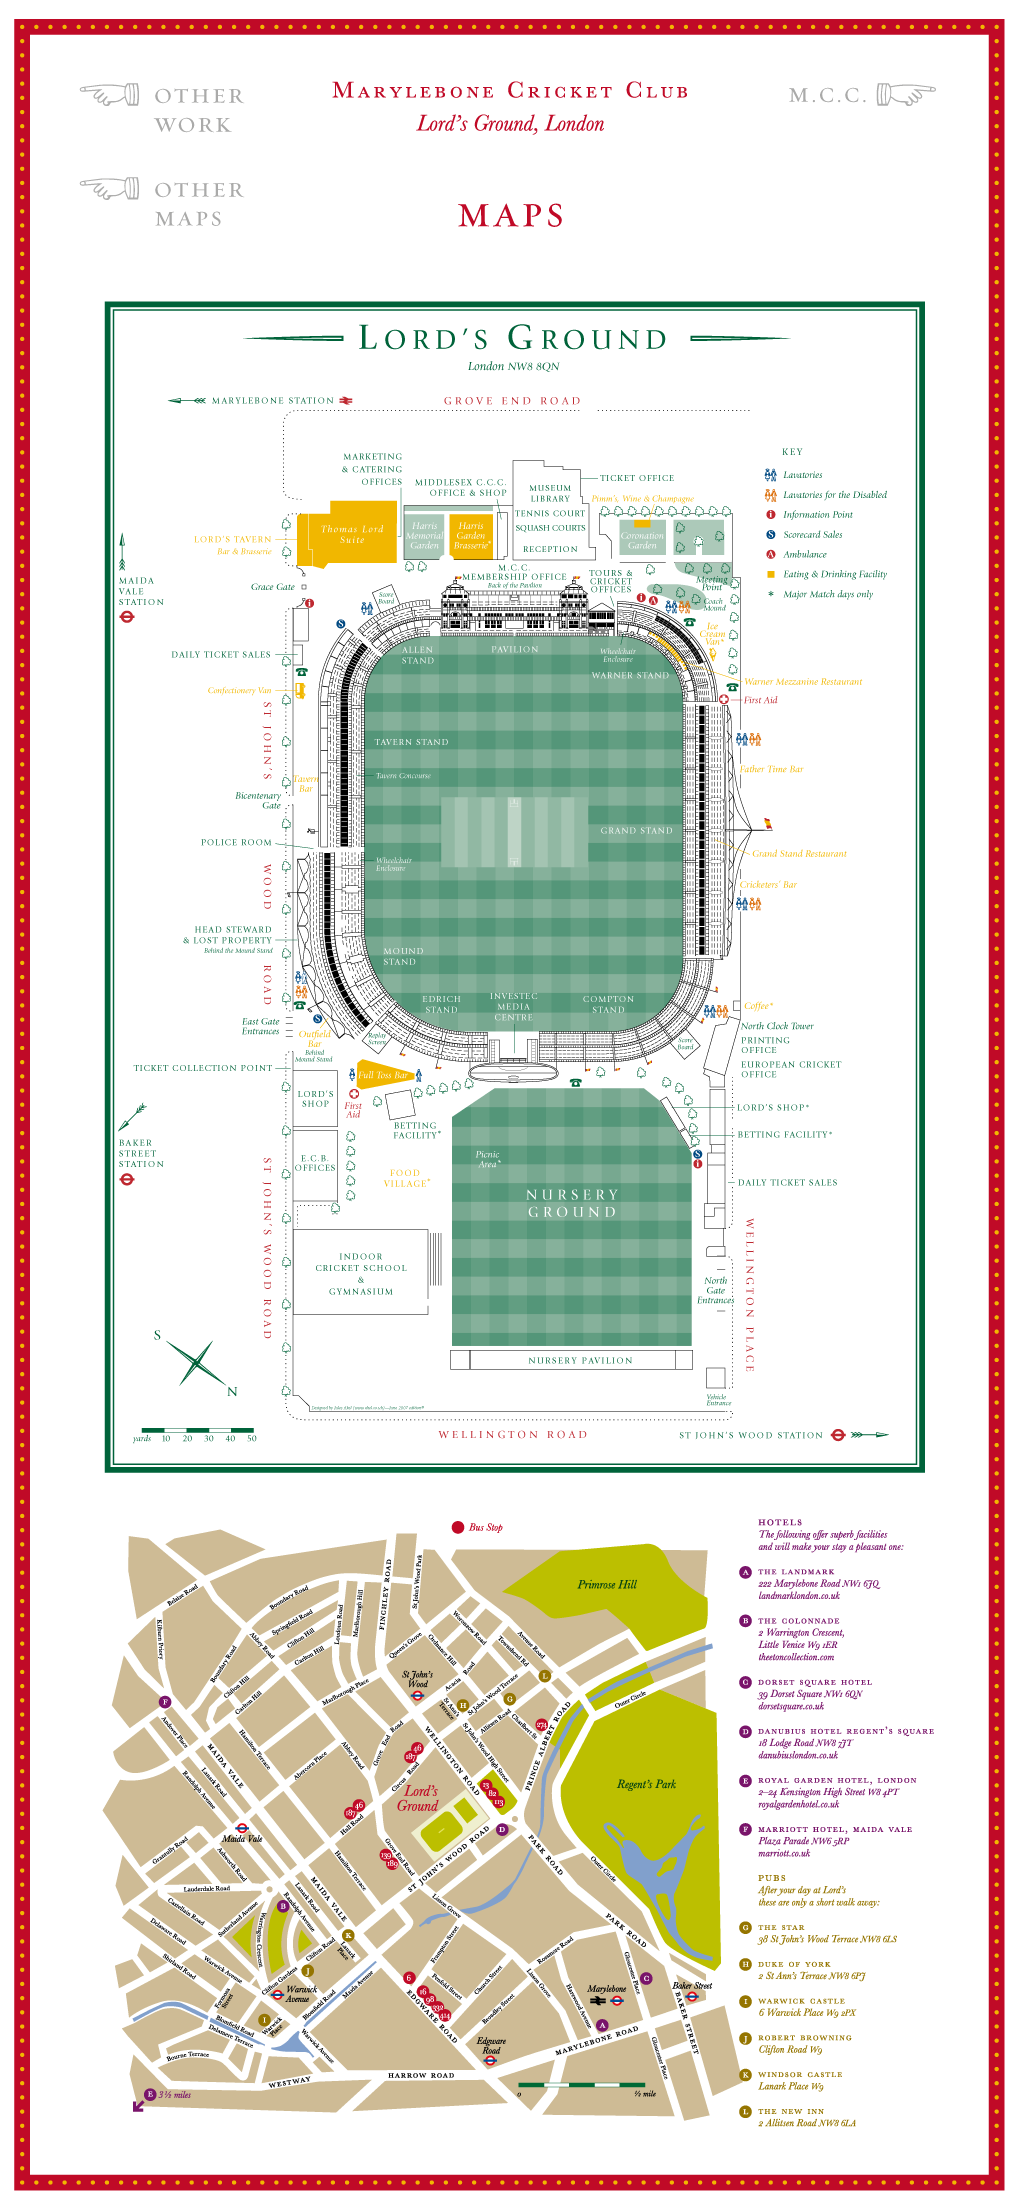 map of lord's cricket ground, map of lords